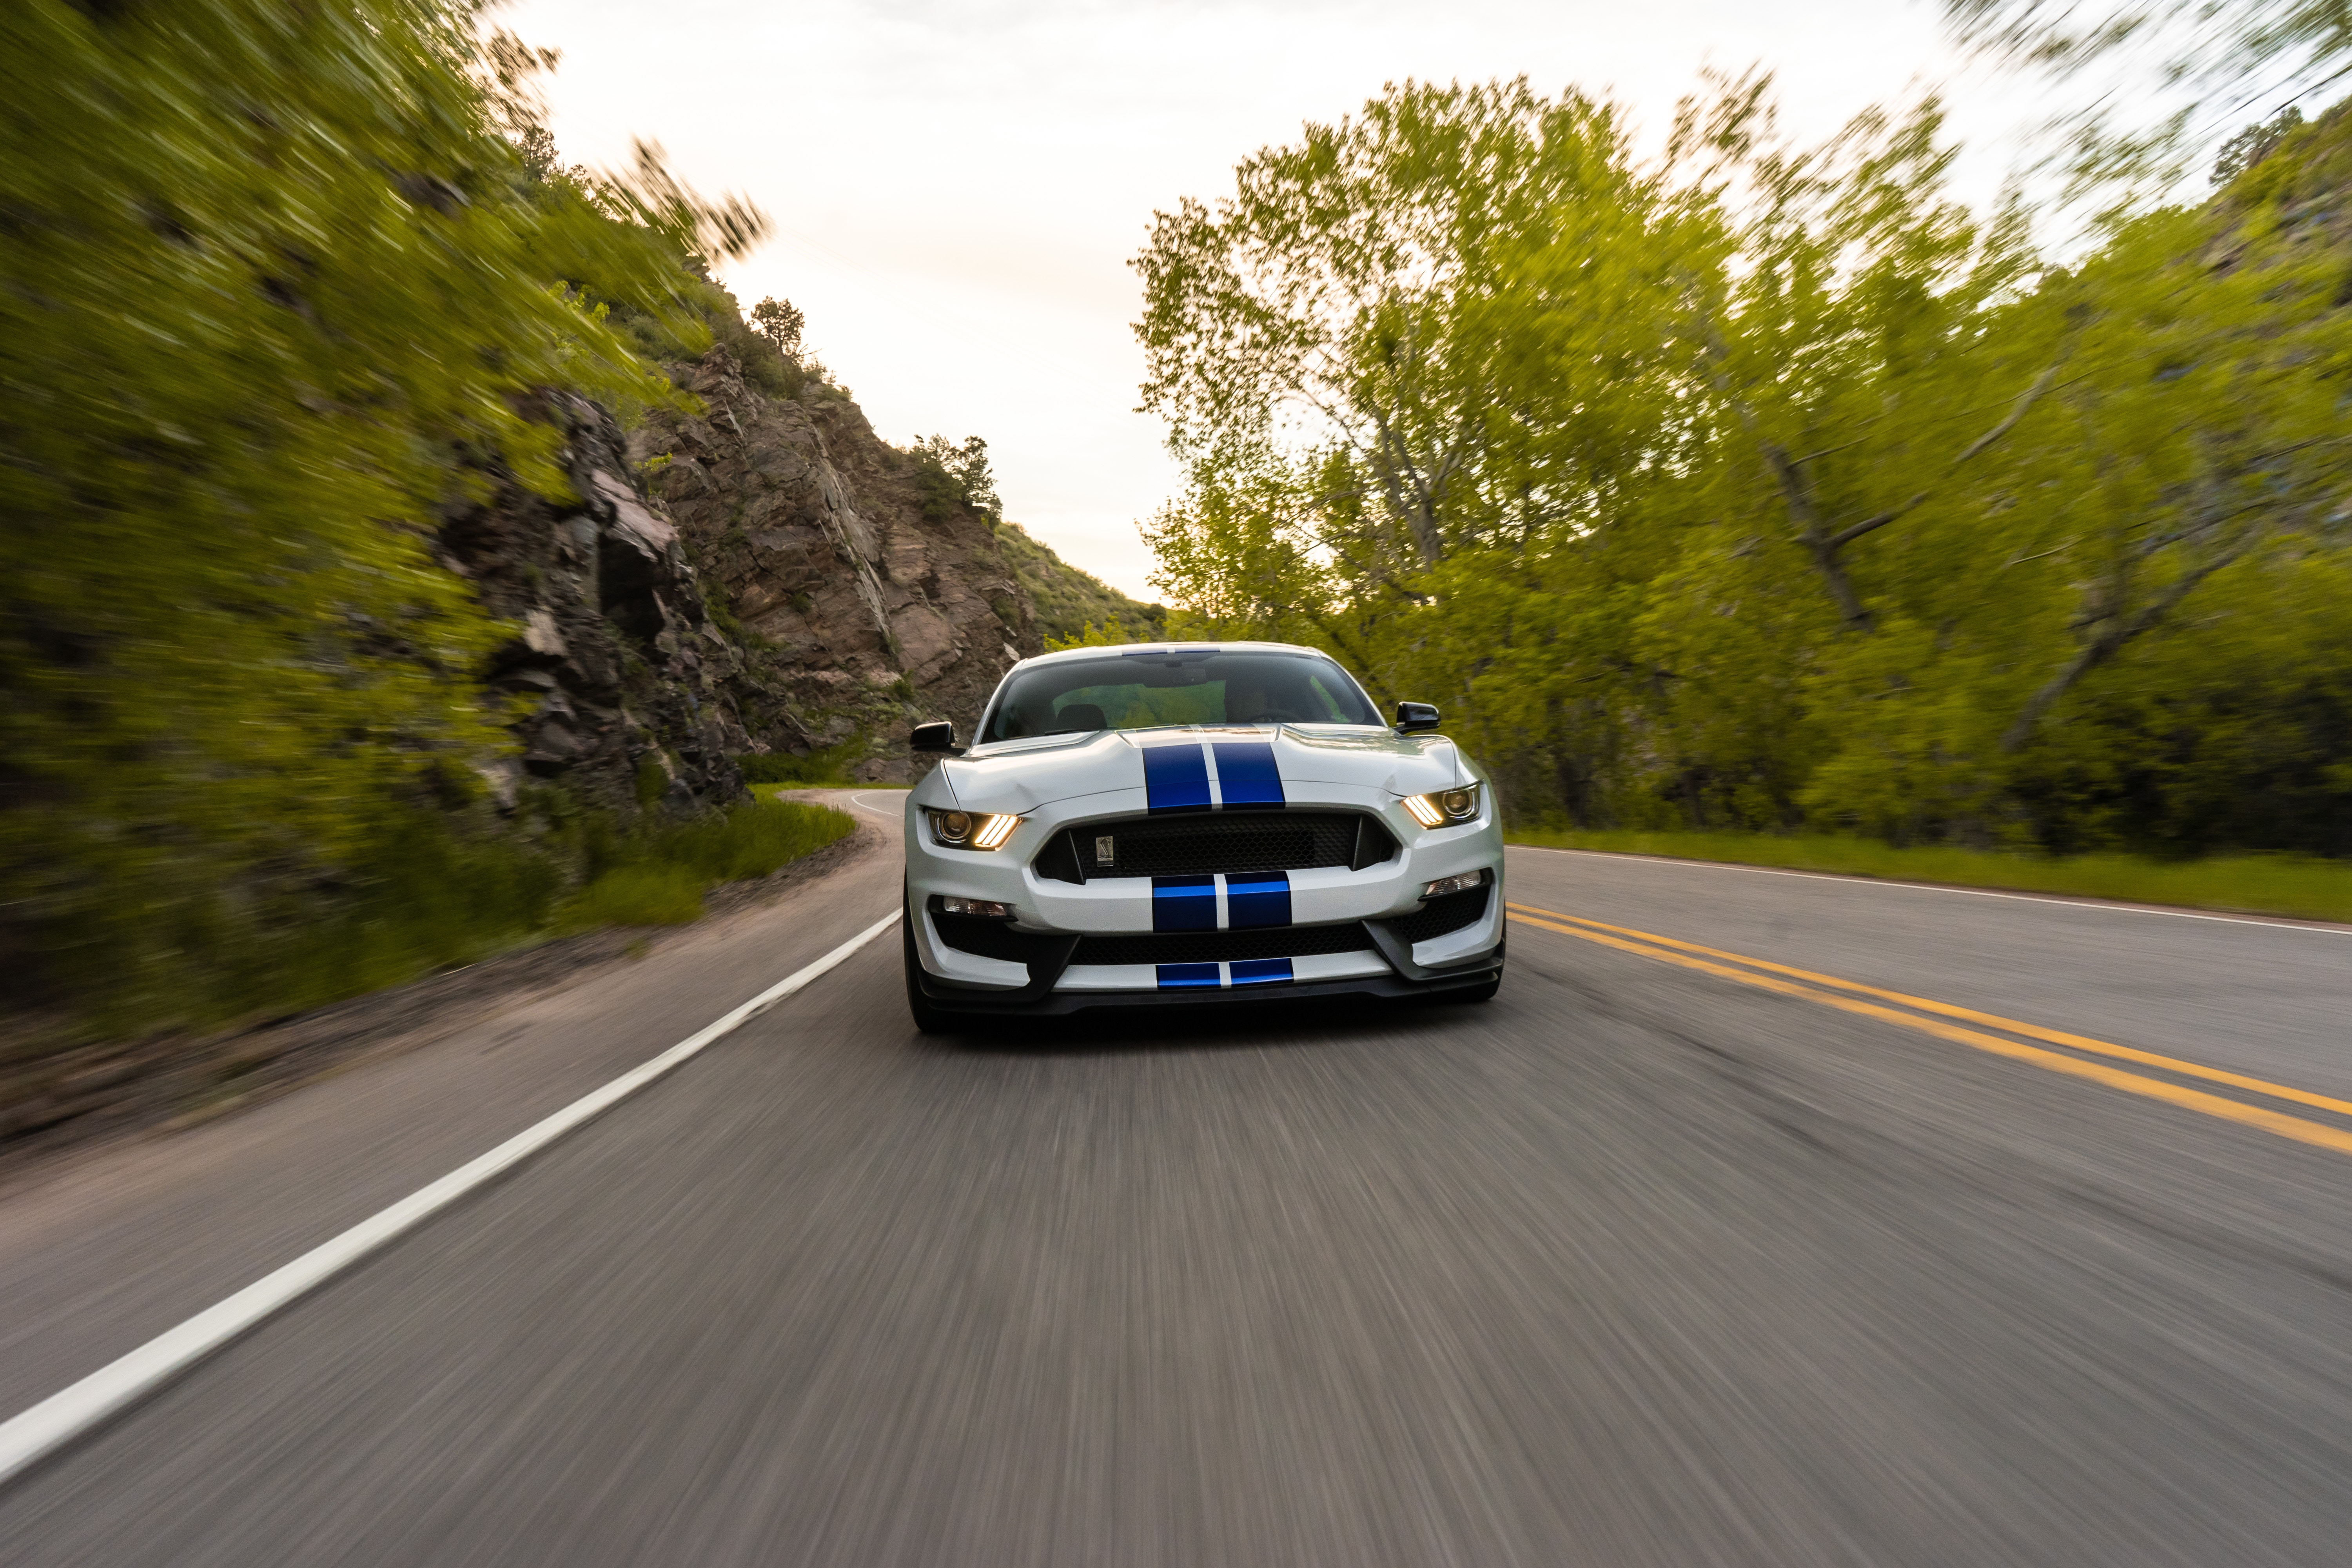 cars, sports car, car, speed, ford mustang gt350, sports, ford, road, machine Full HD